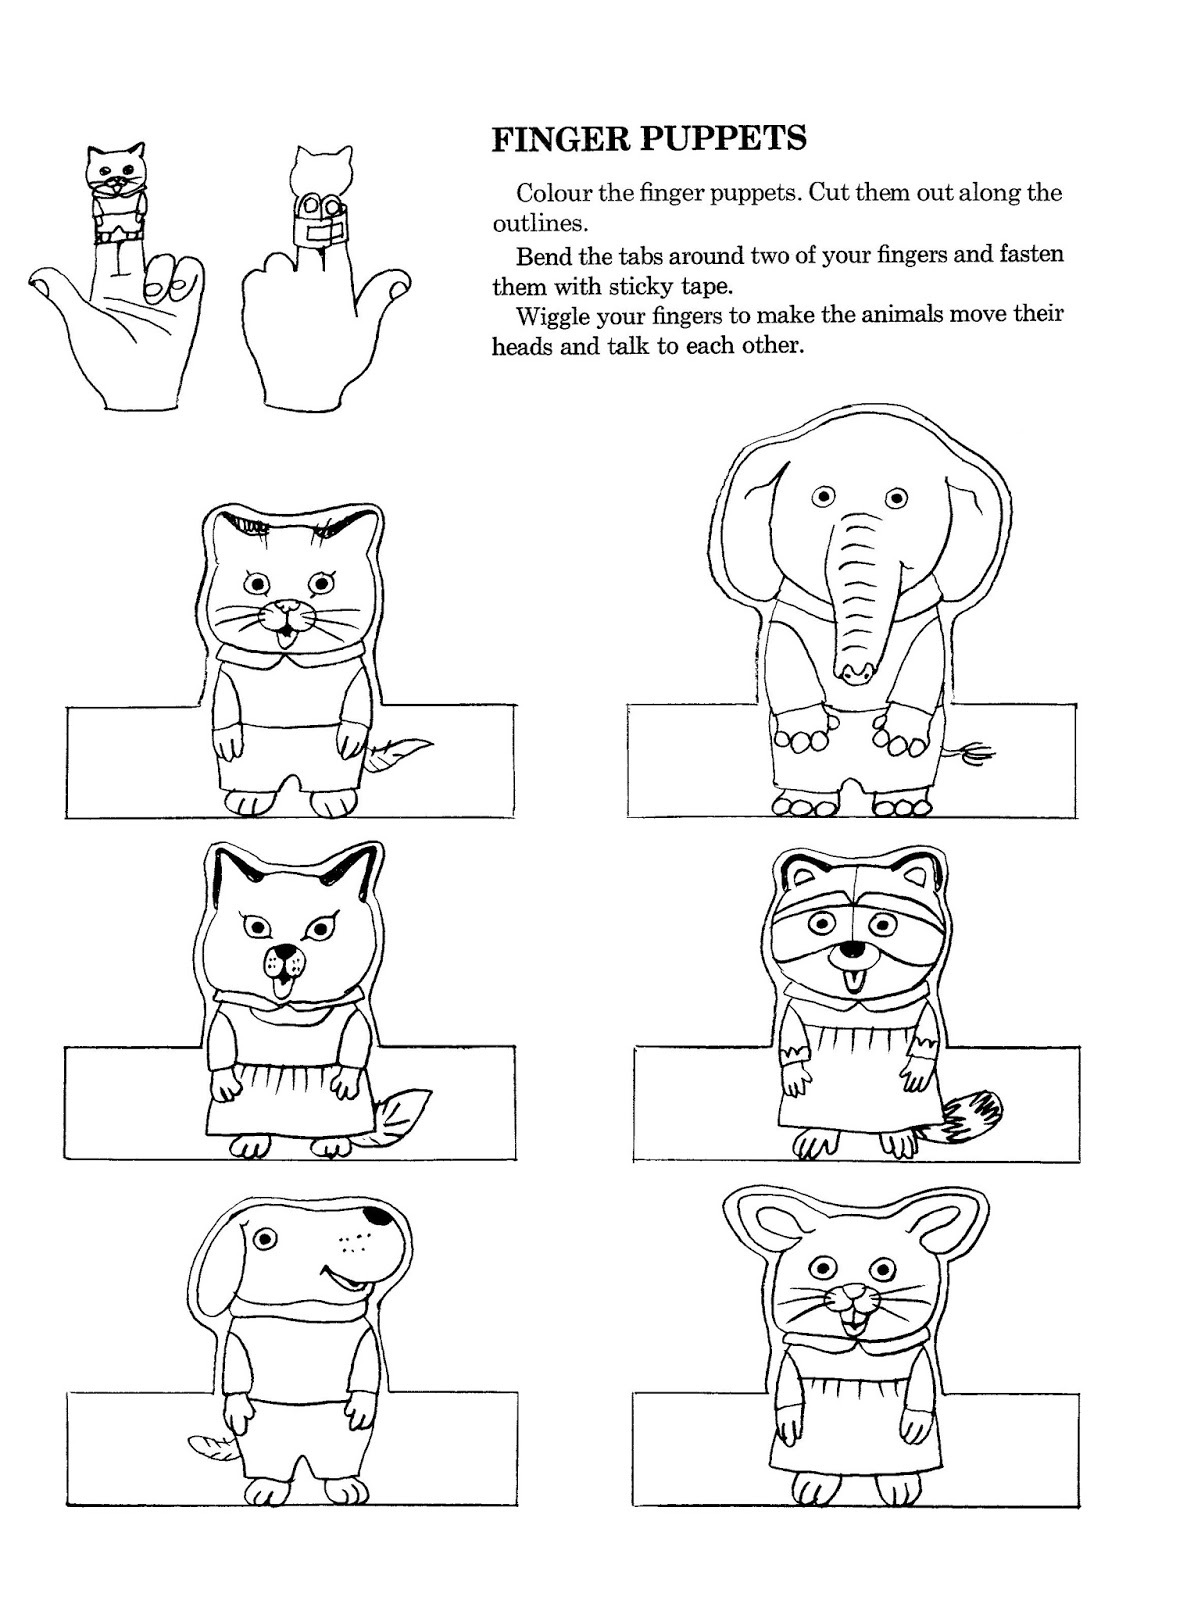 by-the-way-about-free-finger-puppet-templates-below-we-can-see